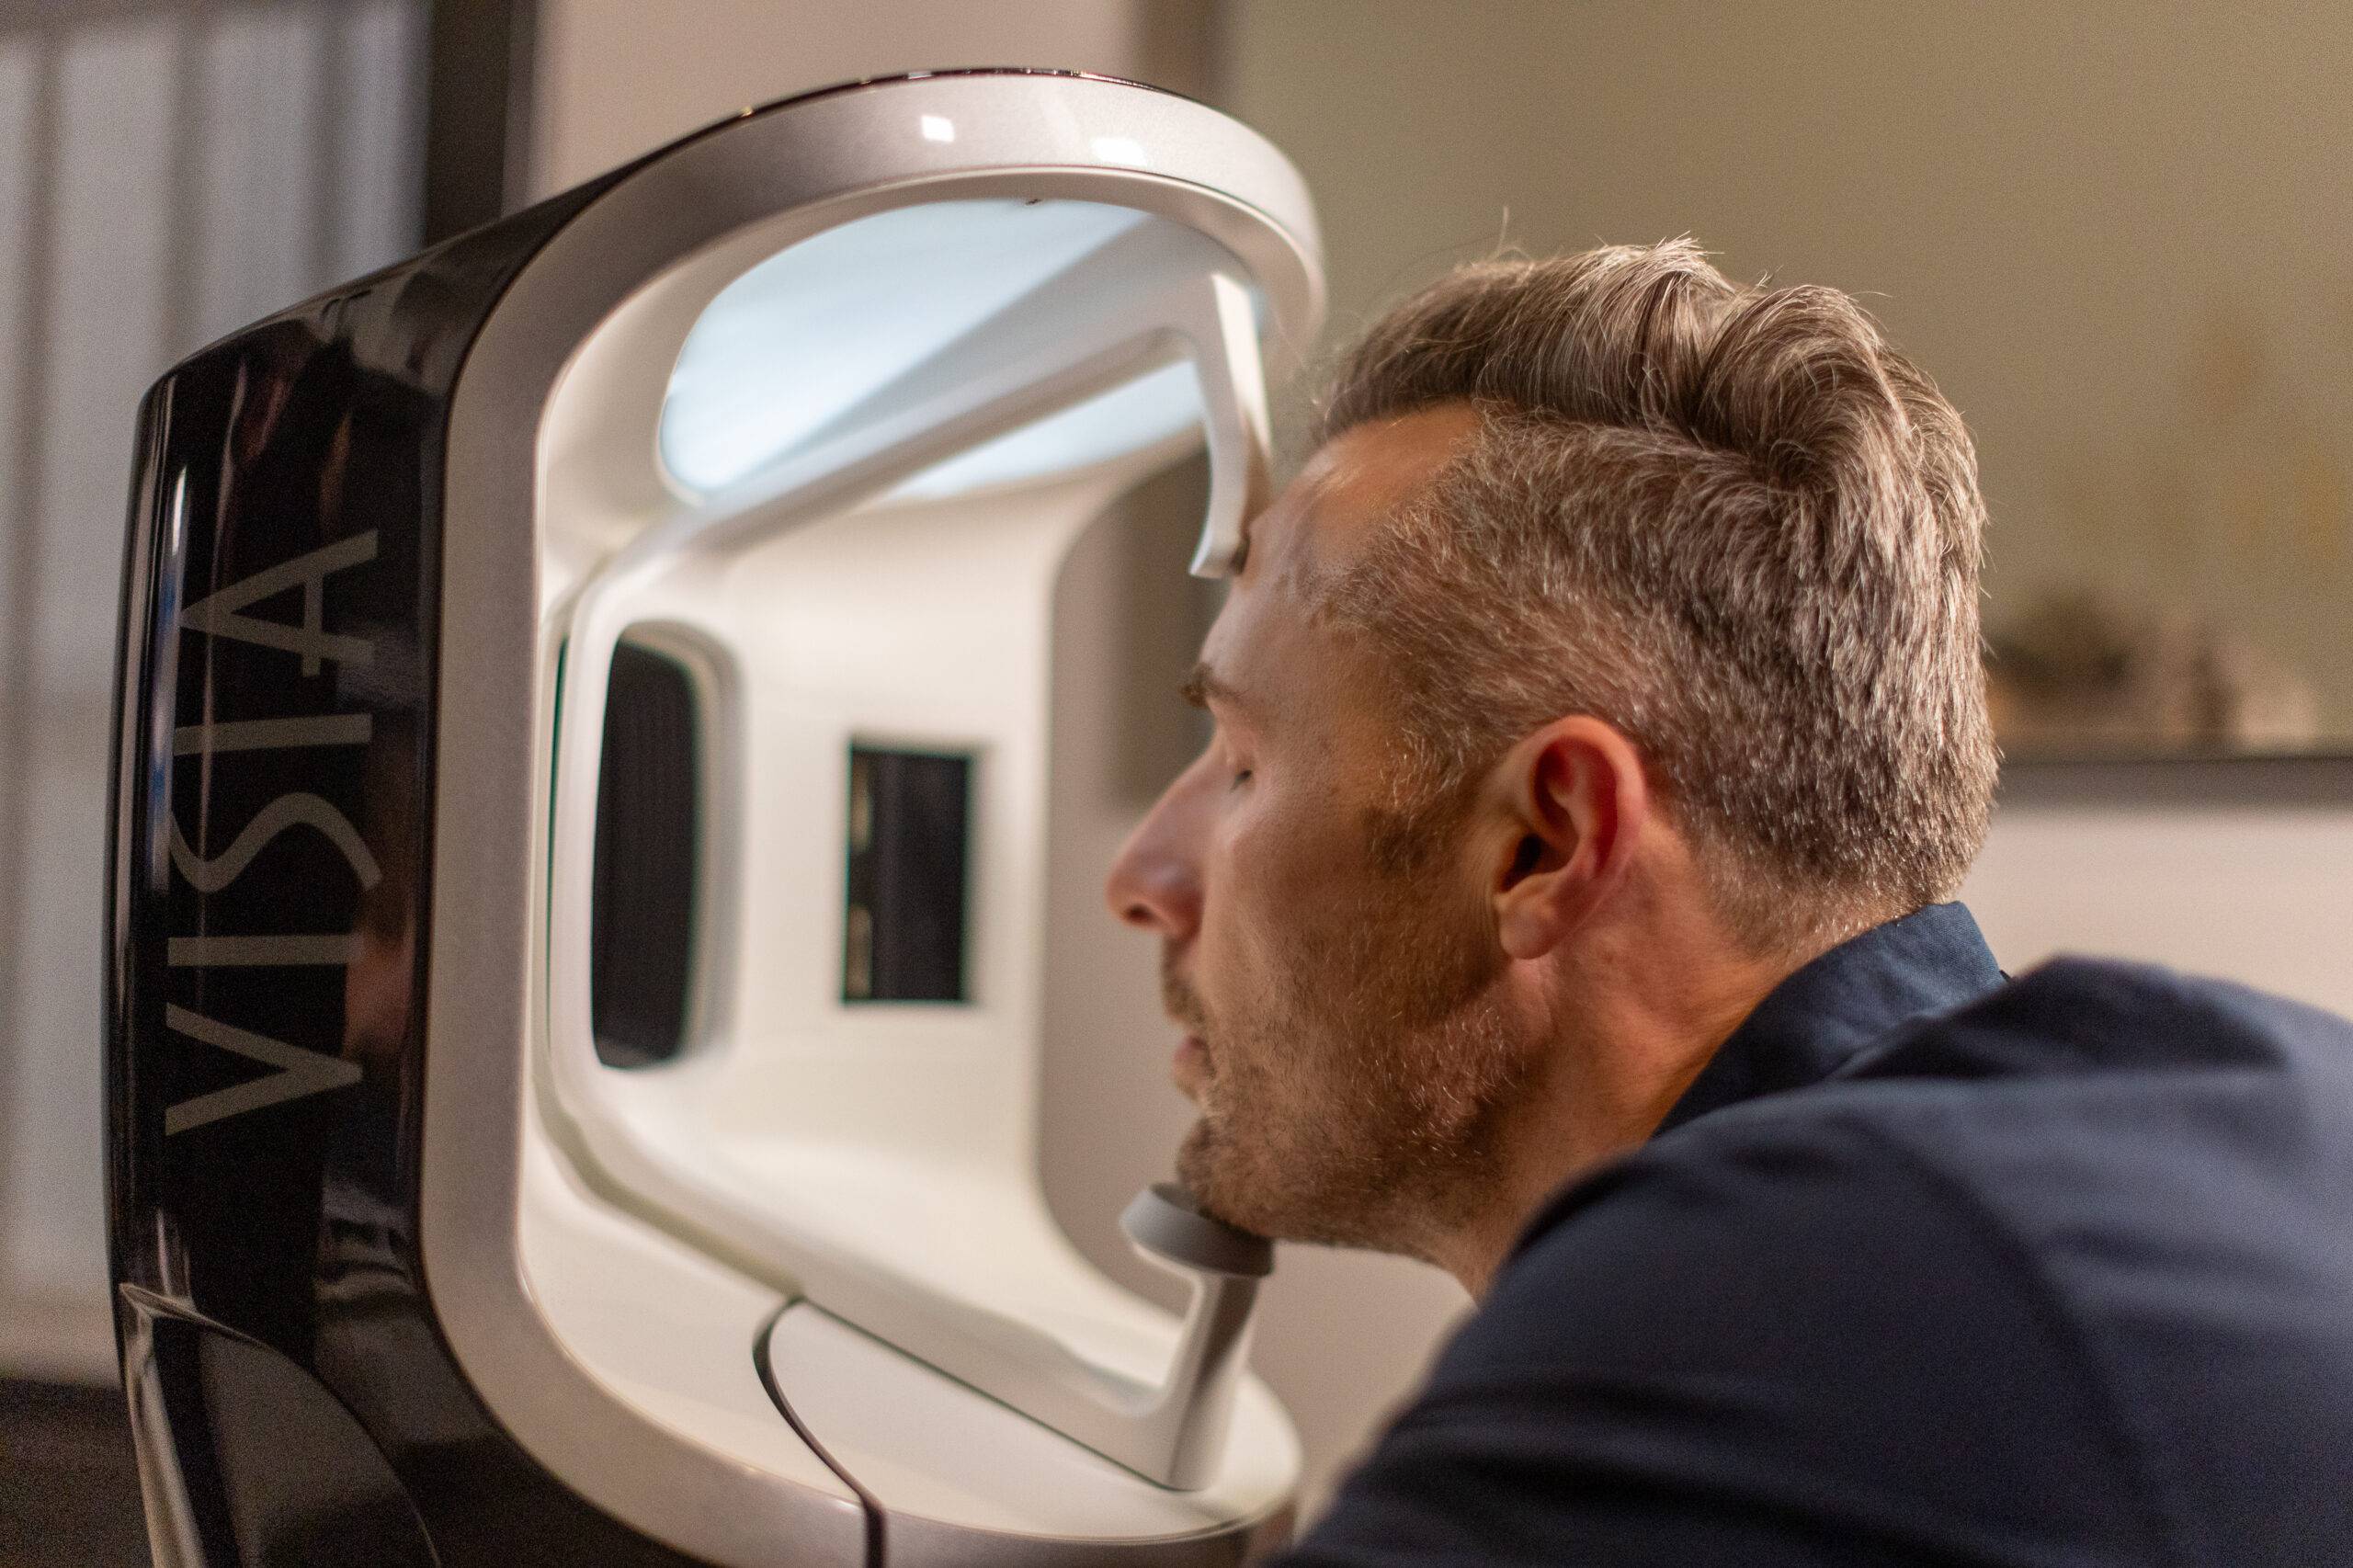 A man with blond hair closely examines the screen of a large, modern, rectangular Visia Skin Analysis machine labeled "vista" in a dimly lit room.